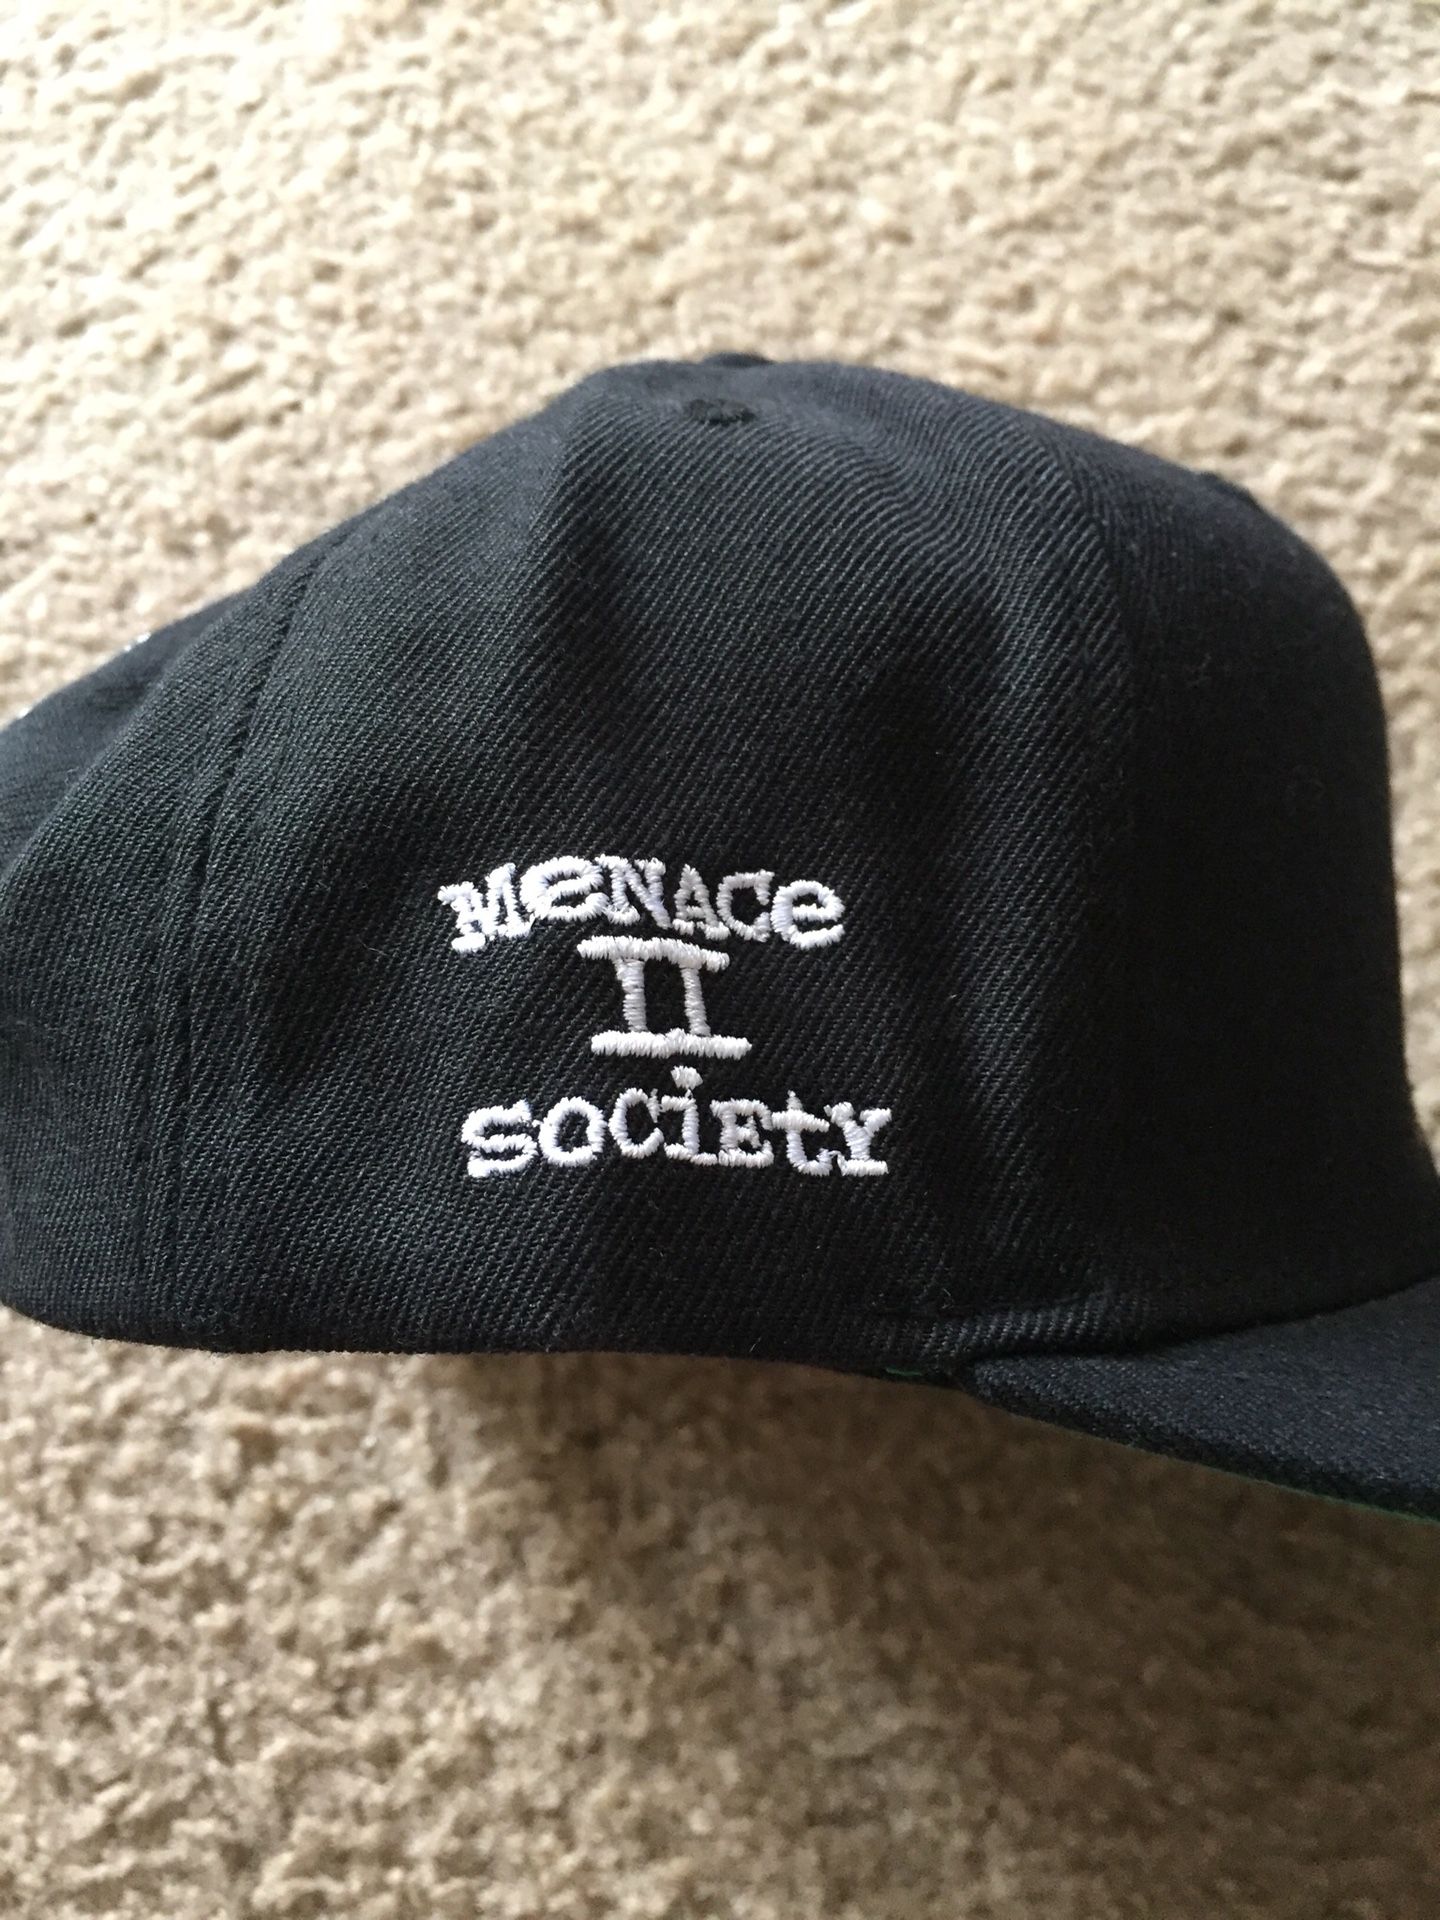 Menace II Society Cap for Sale by J-O-deci91